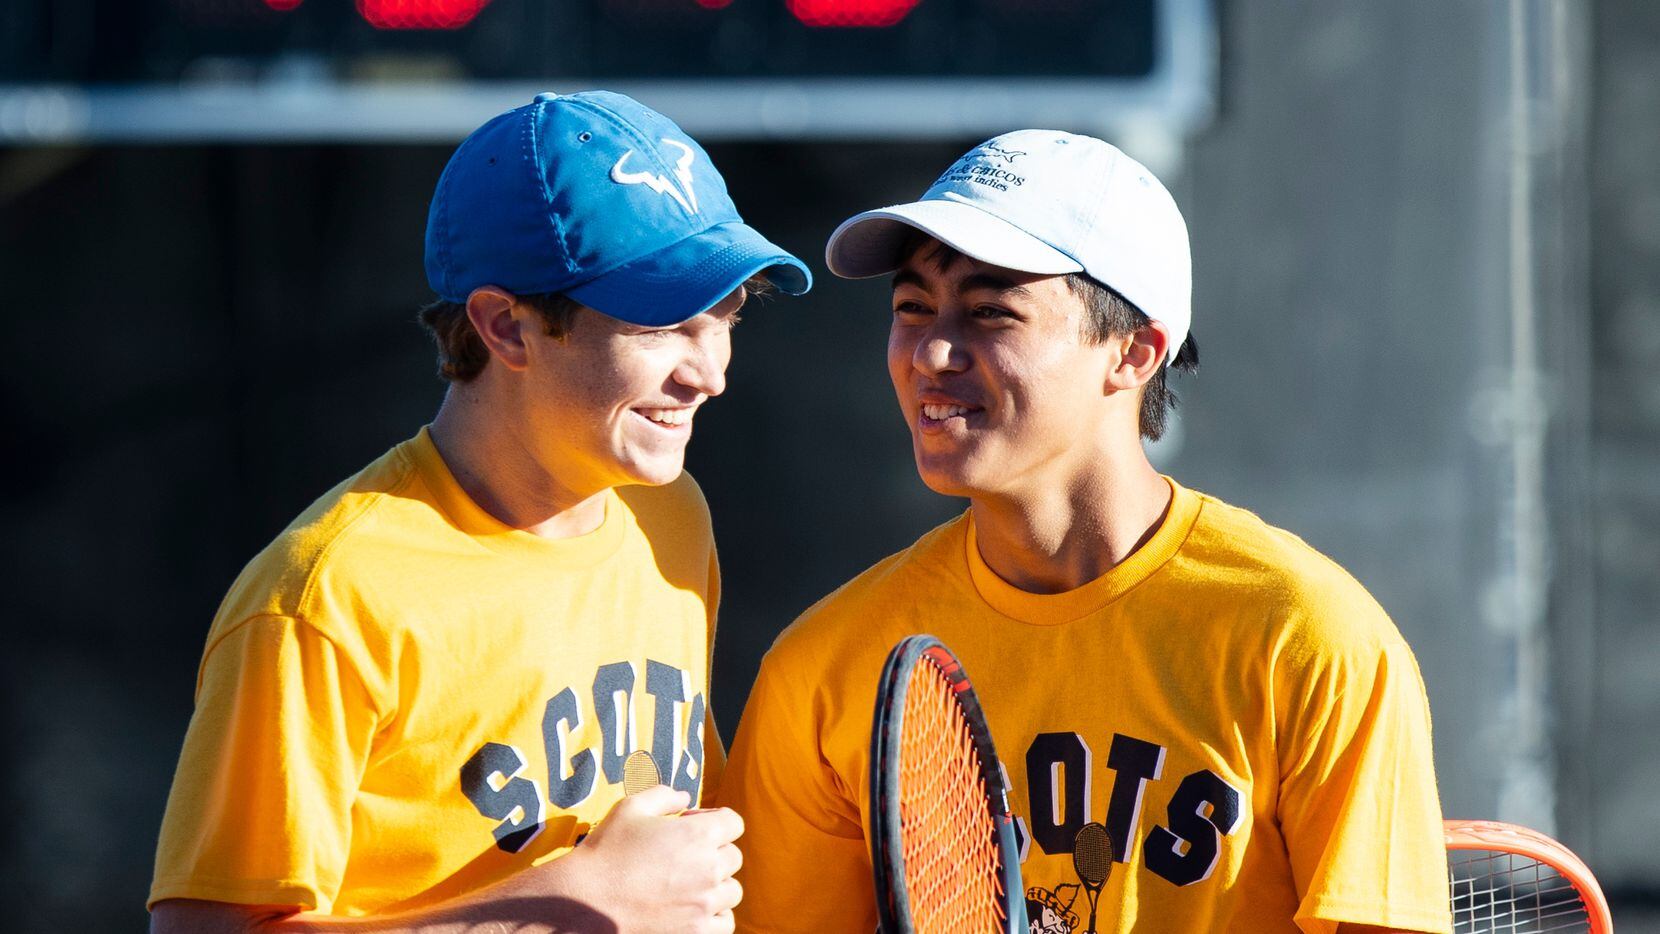 Highland Park’s Carl Newell, left, and William Covin celebrate during a double match against...